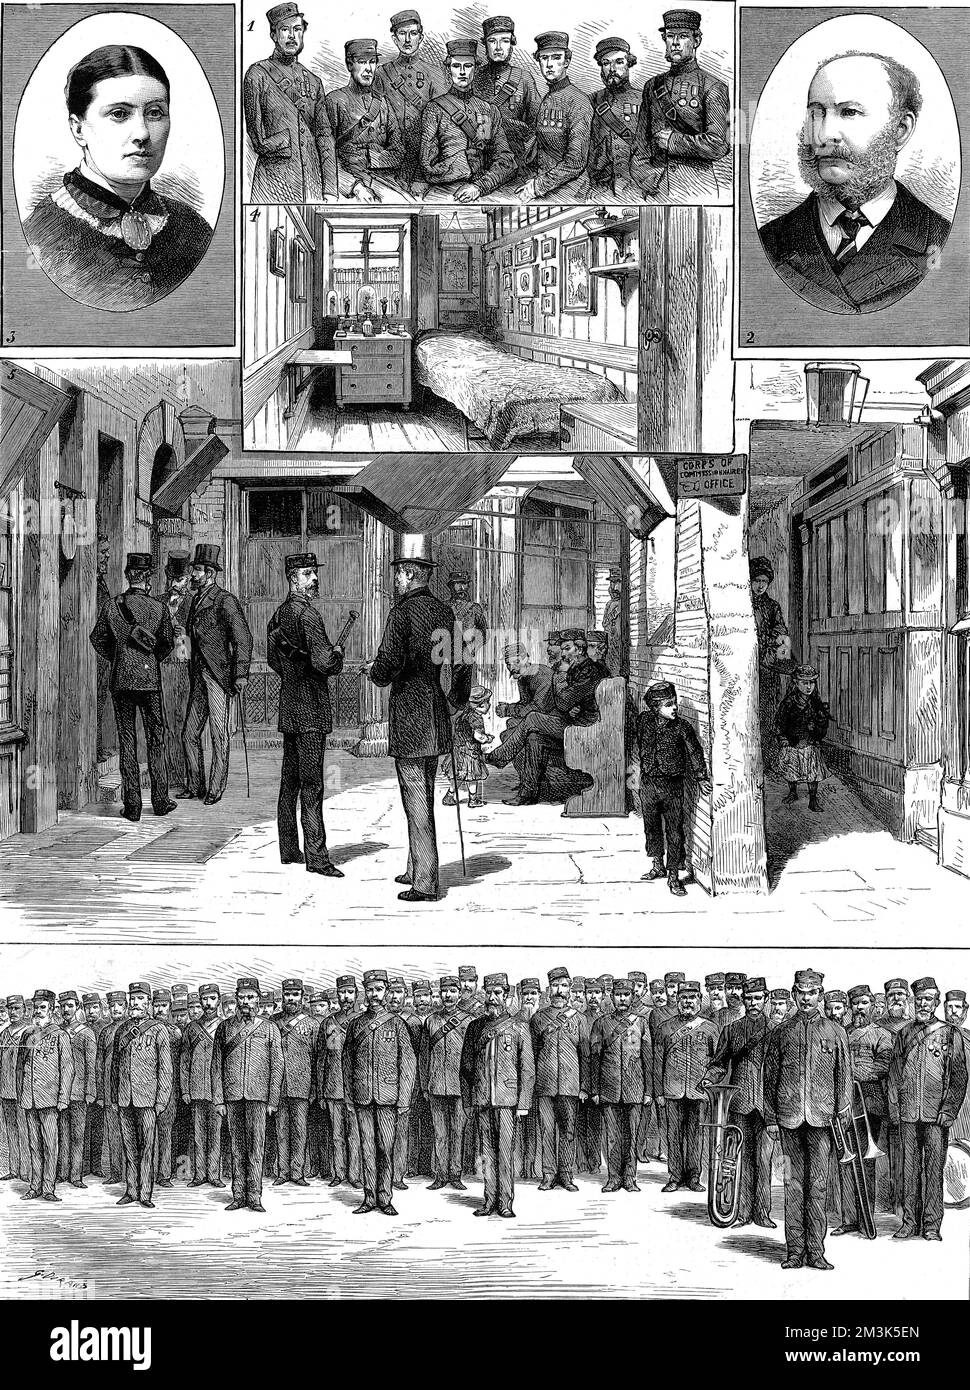 Number of scenes relevant to the Corps of Commissioners, London, 1880.   The images show (clockwise from top left): Mrs. Brook Smith, Lady Adjutant; Original Members of the Corps; a bedroom in the Barracks; Captain E. Walters, founder and Commanding Officer of the Corps; Corps Headquarters, Exchange Court, Strand; General Parade of the Corps.  1880 Stock Photo